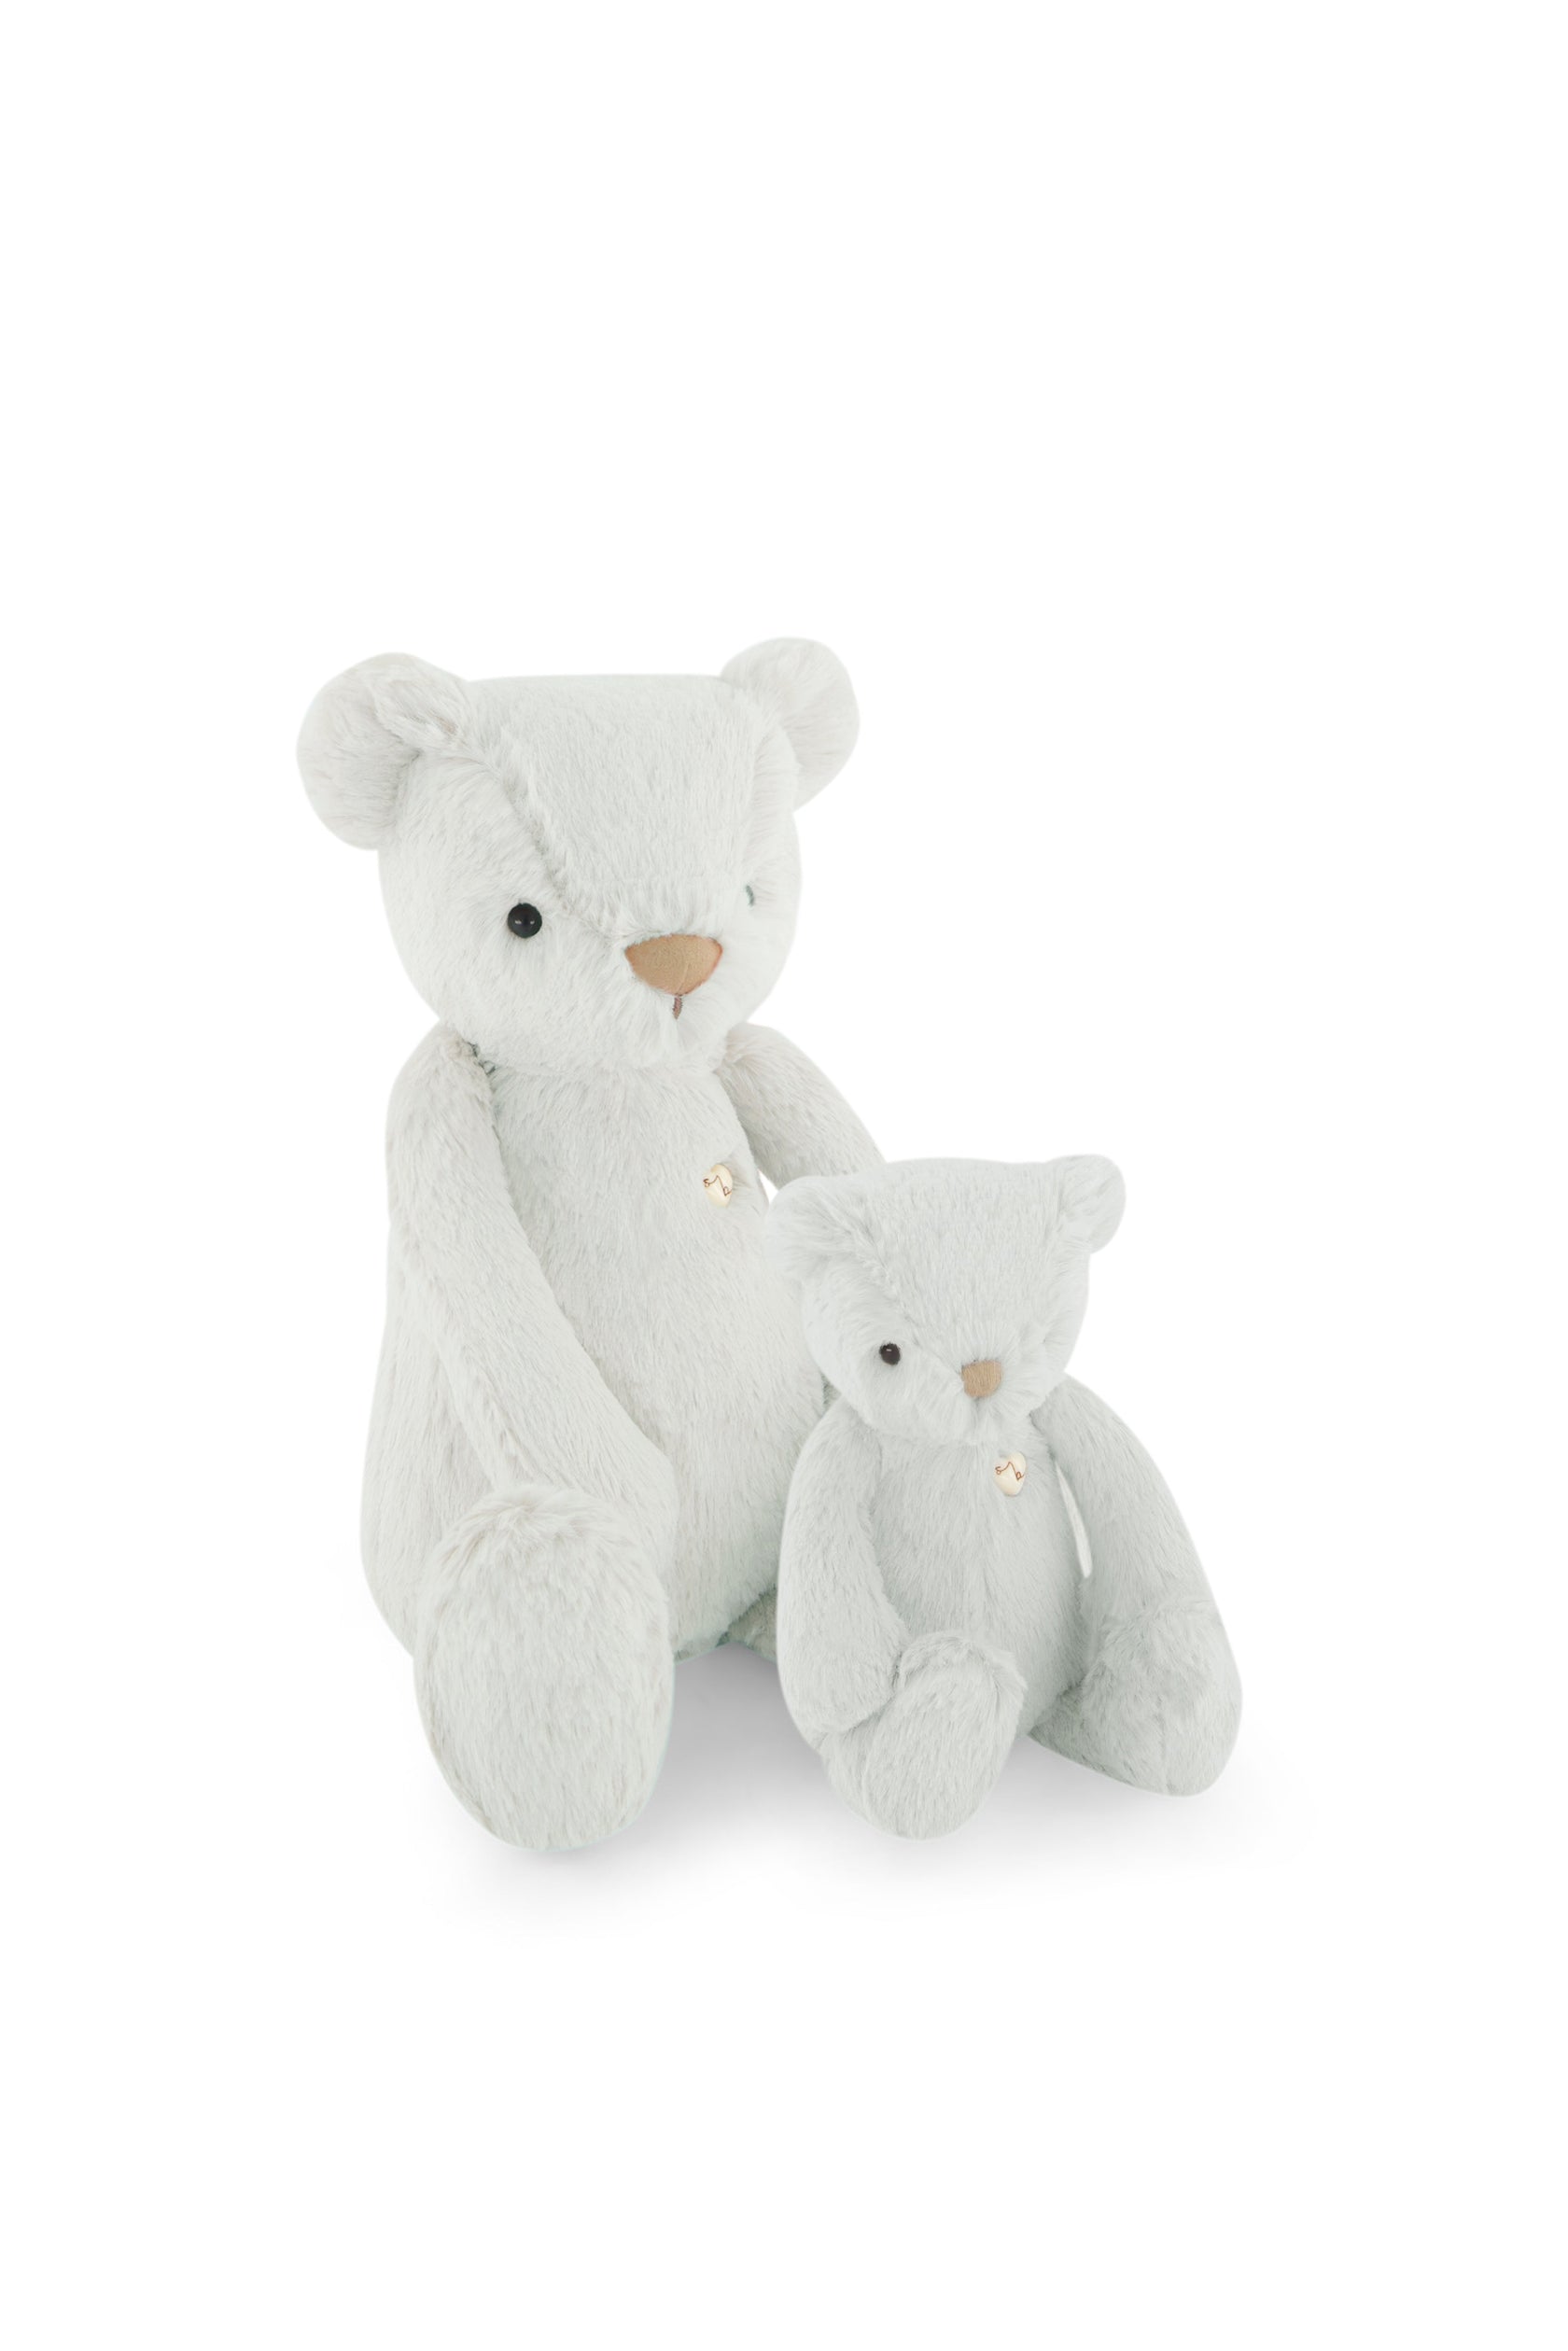 Snuggle Bunnies - George the Bear - Willow